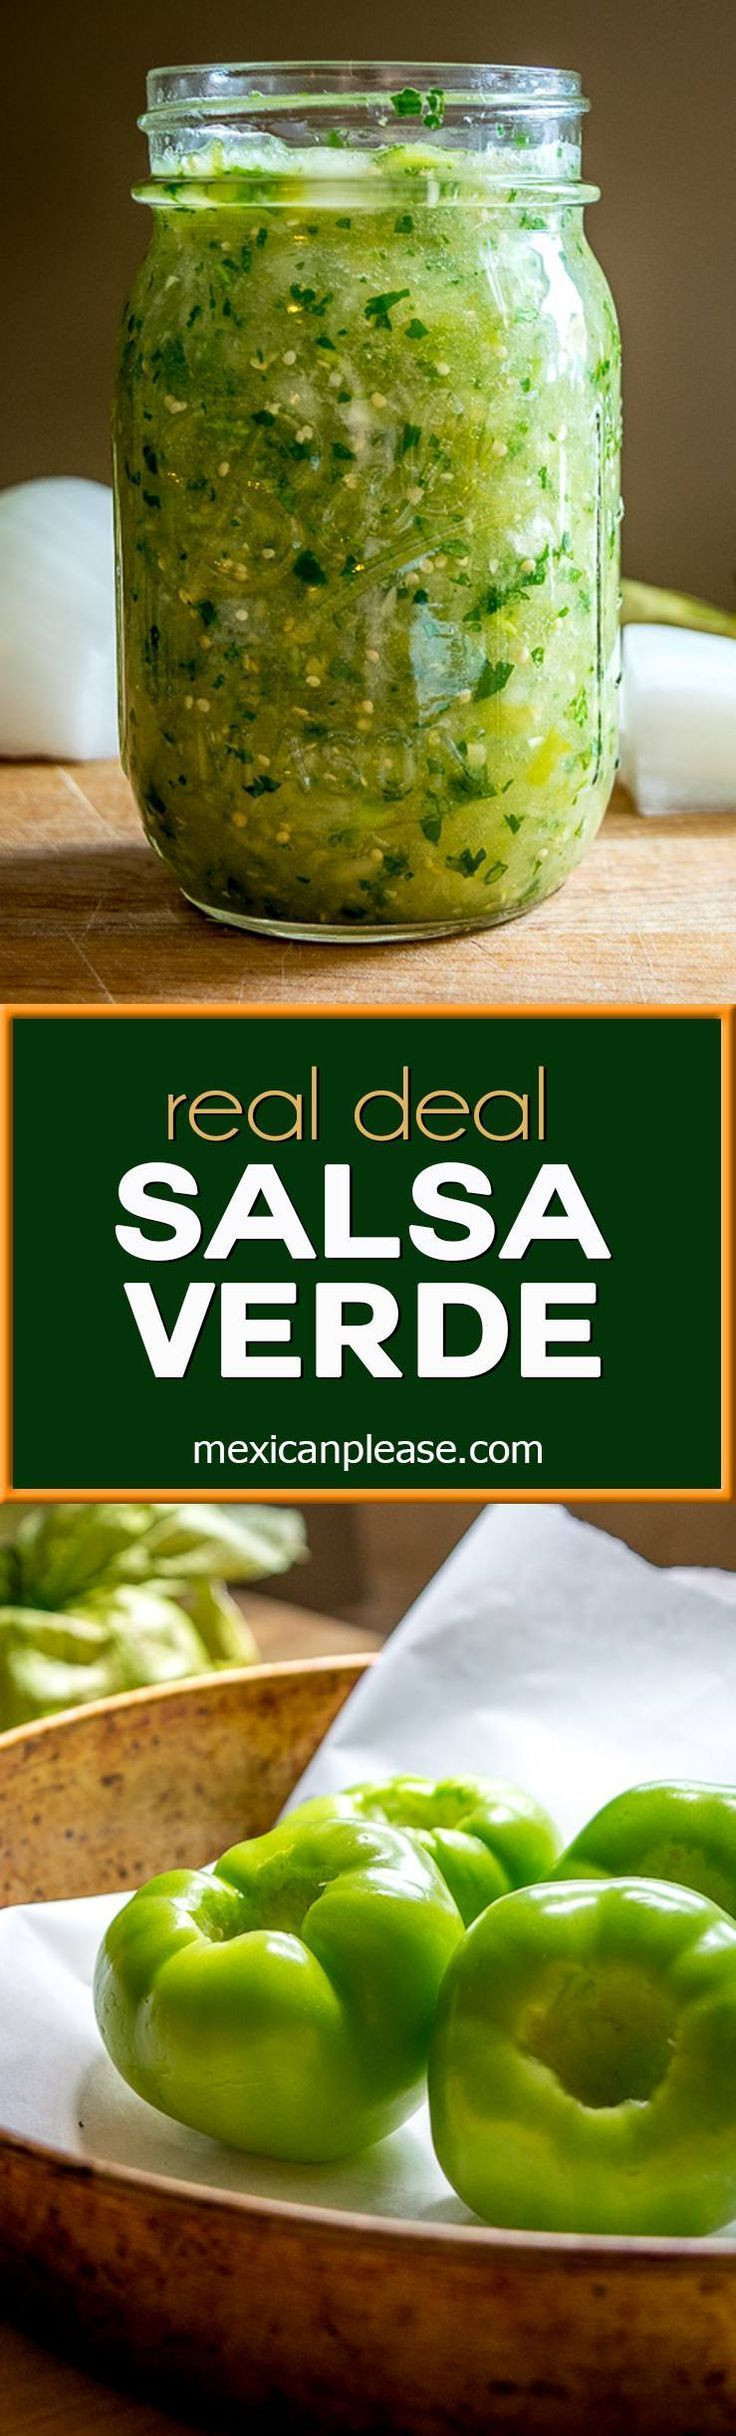 Authentic Salsa Verde Recipe For Canning
 A homemade green salsa can transform eggs carnitas and